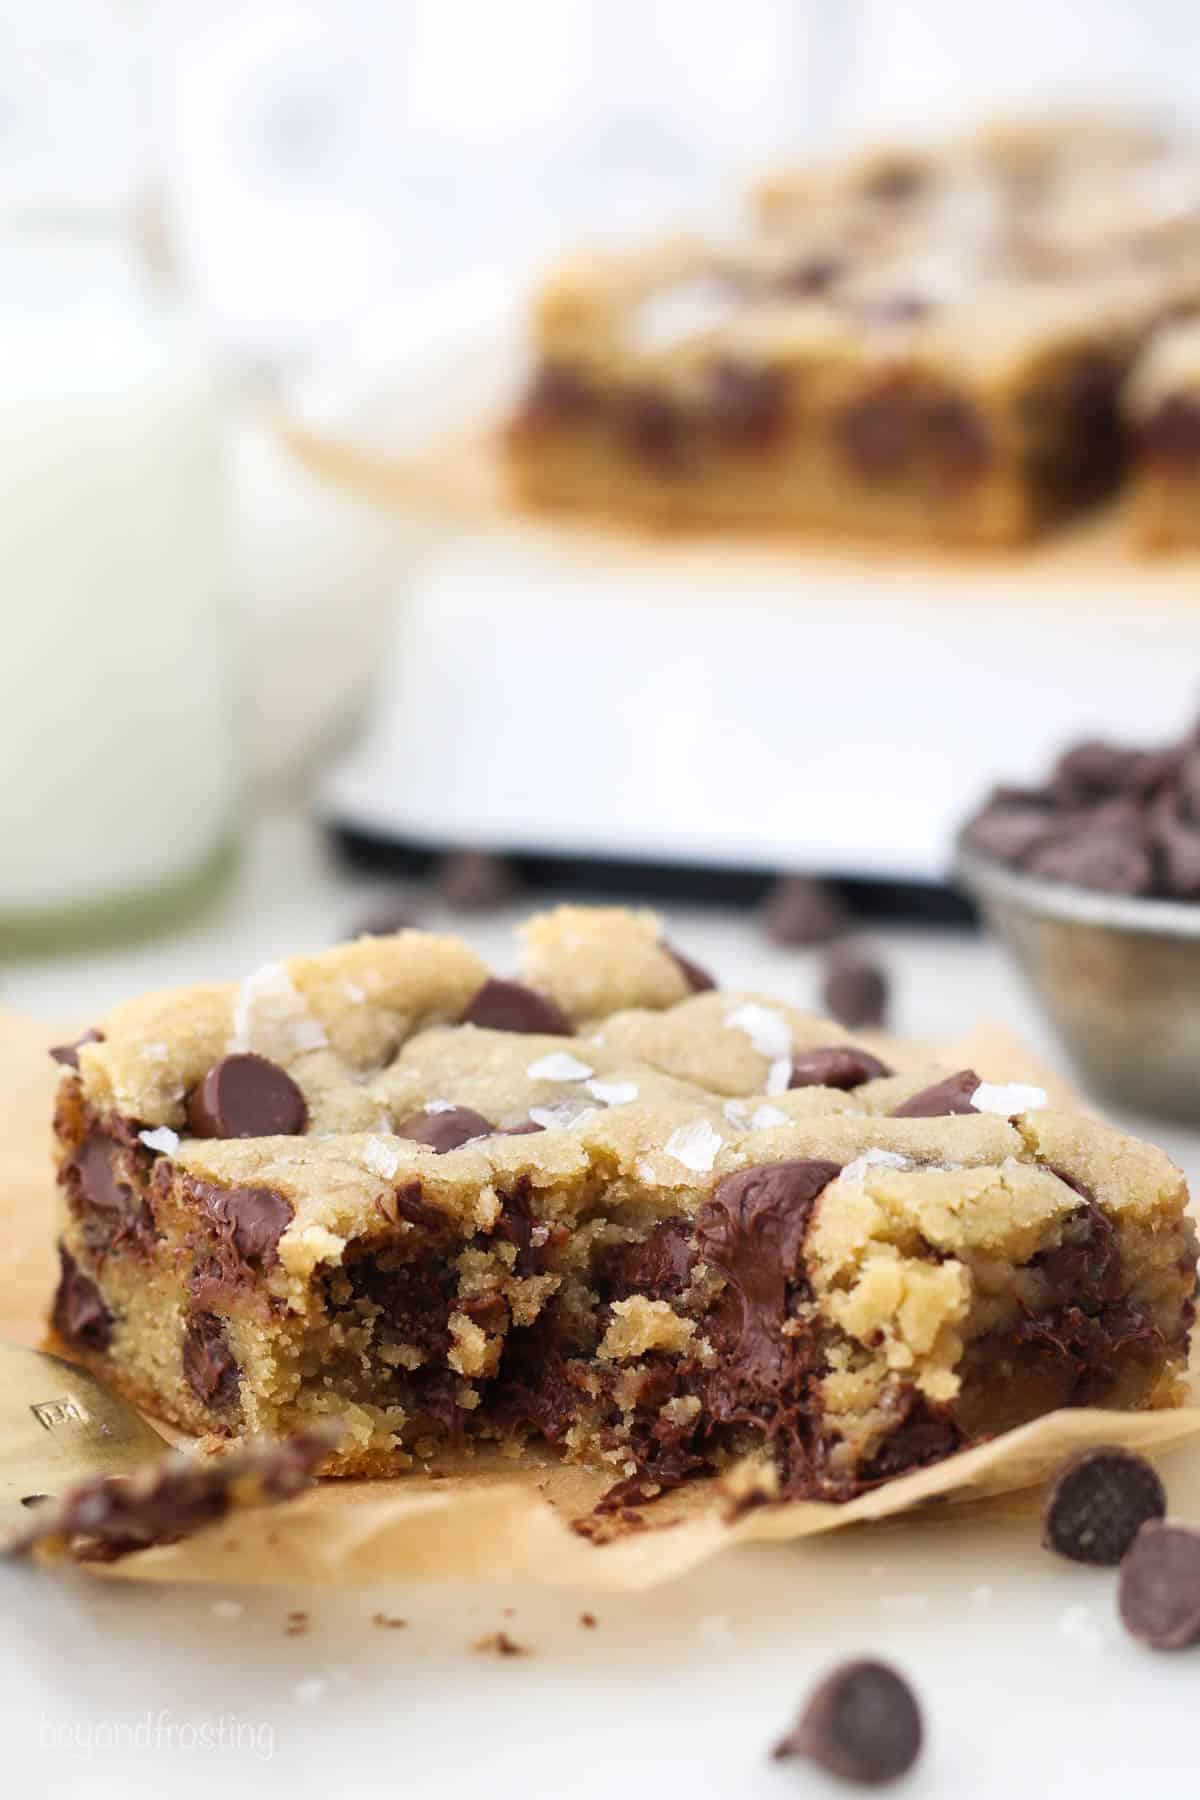 Angled view of a chocolate chip cookie bar with a bite missing